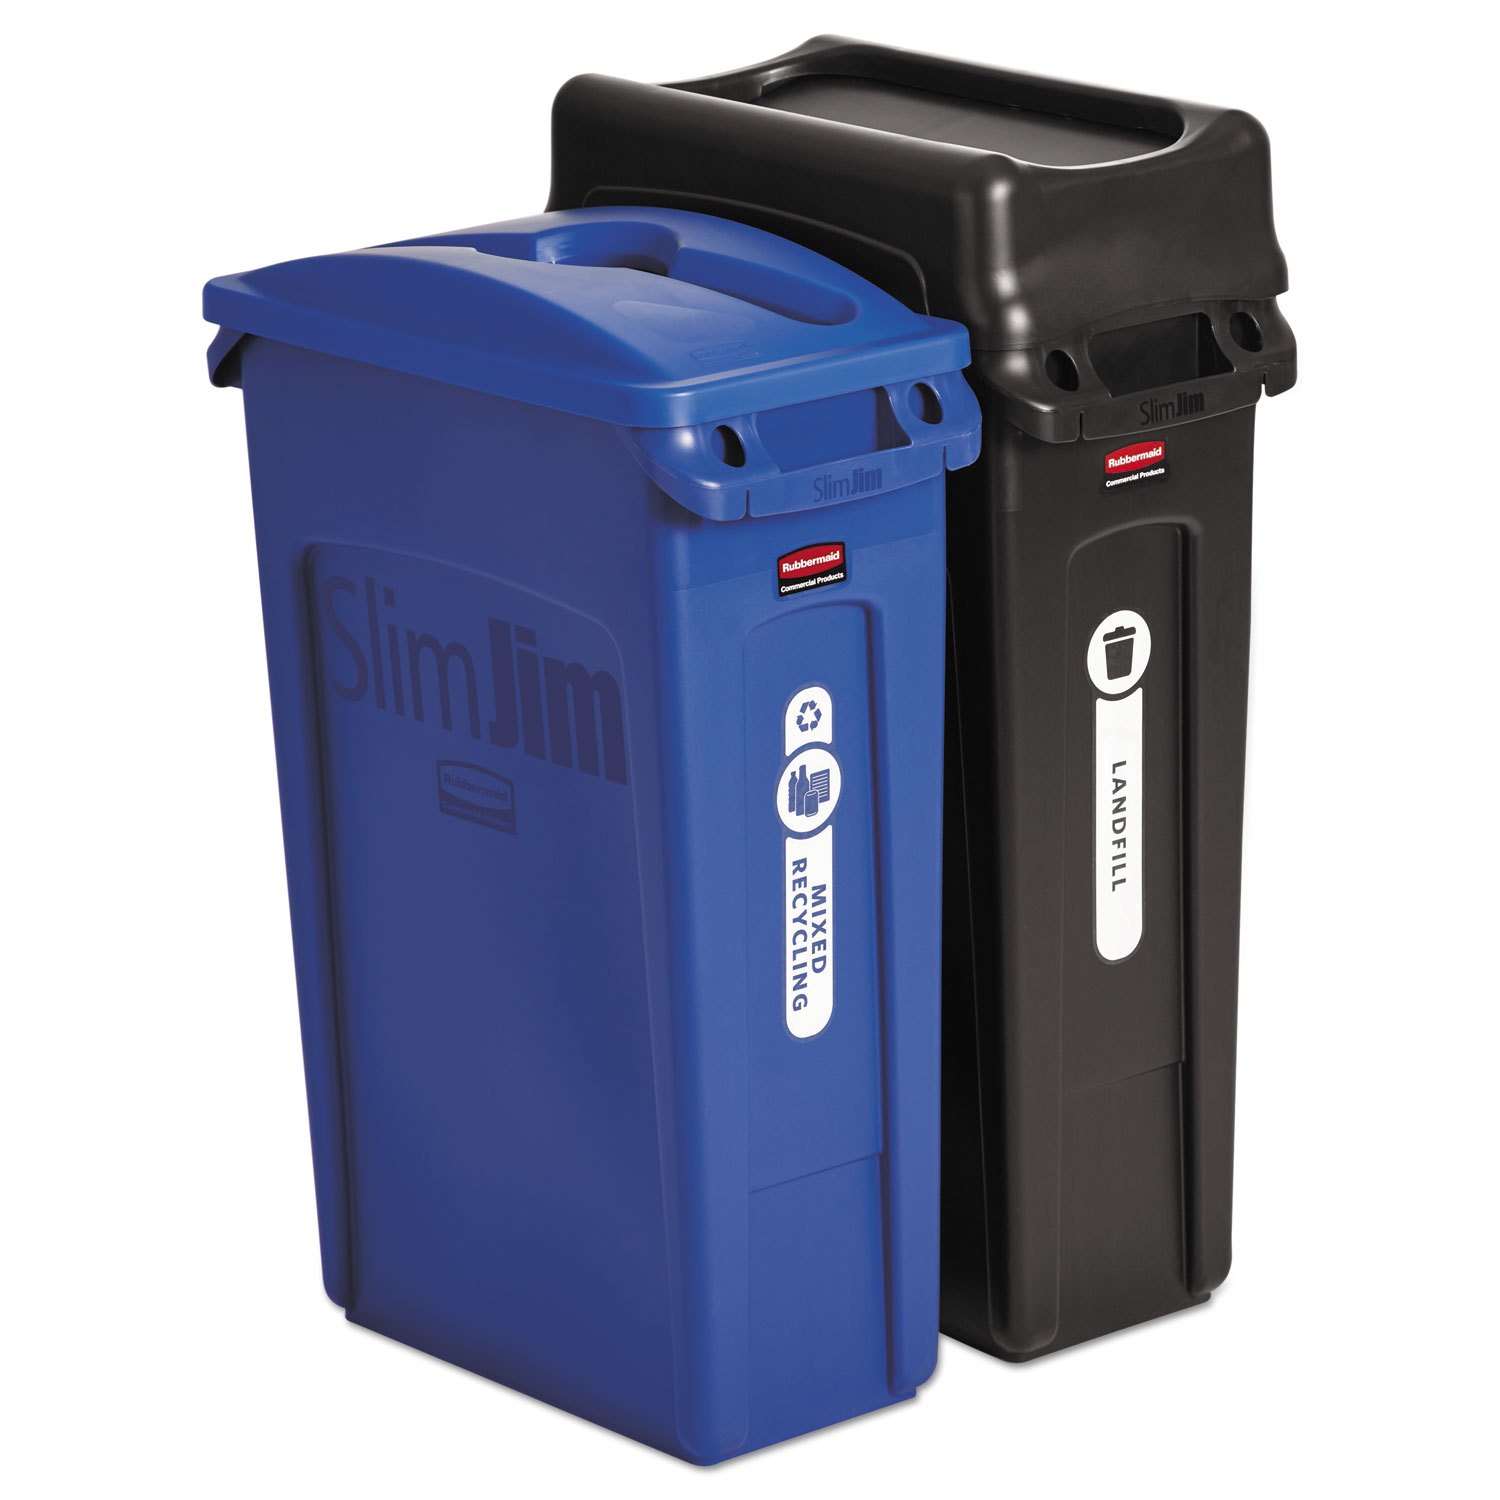  Rubbermaid Commercial 1998896 Slim Jim Recycling Container, Rectangular, 23 gal, Black/Blue (RCP1998896) 